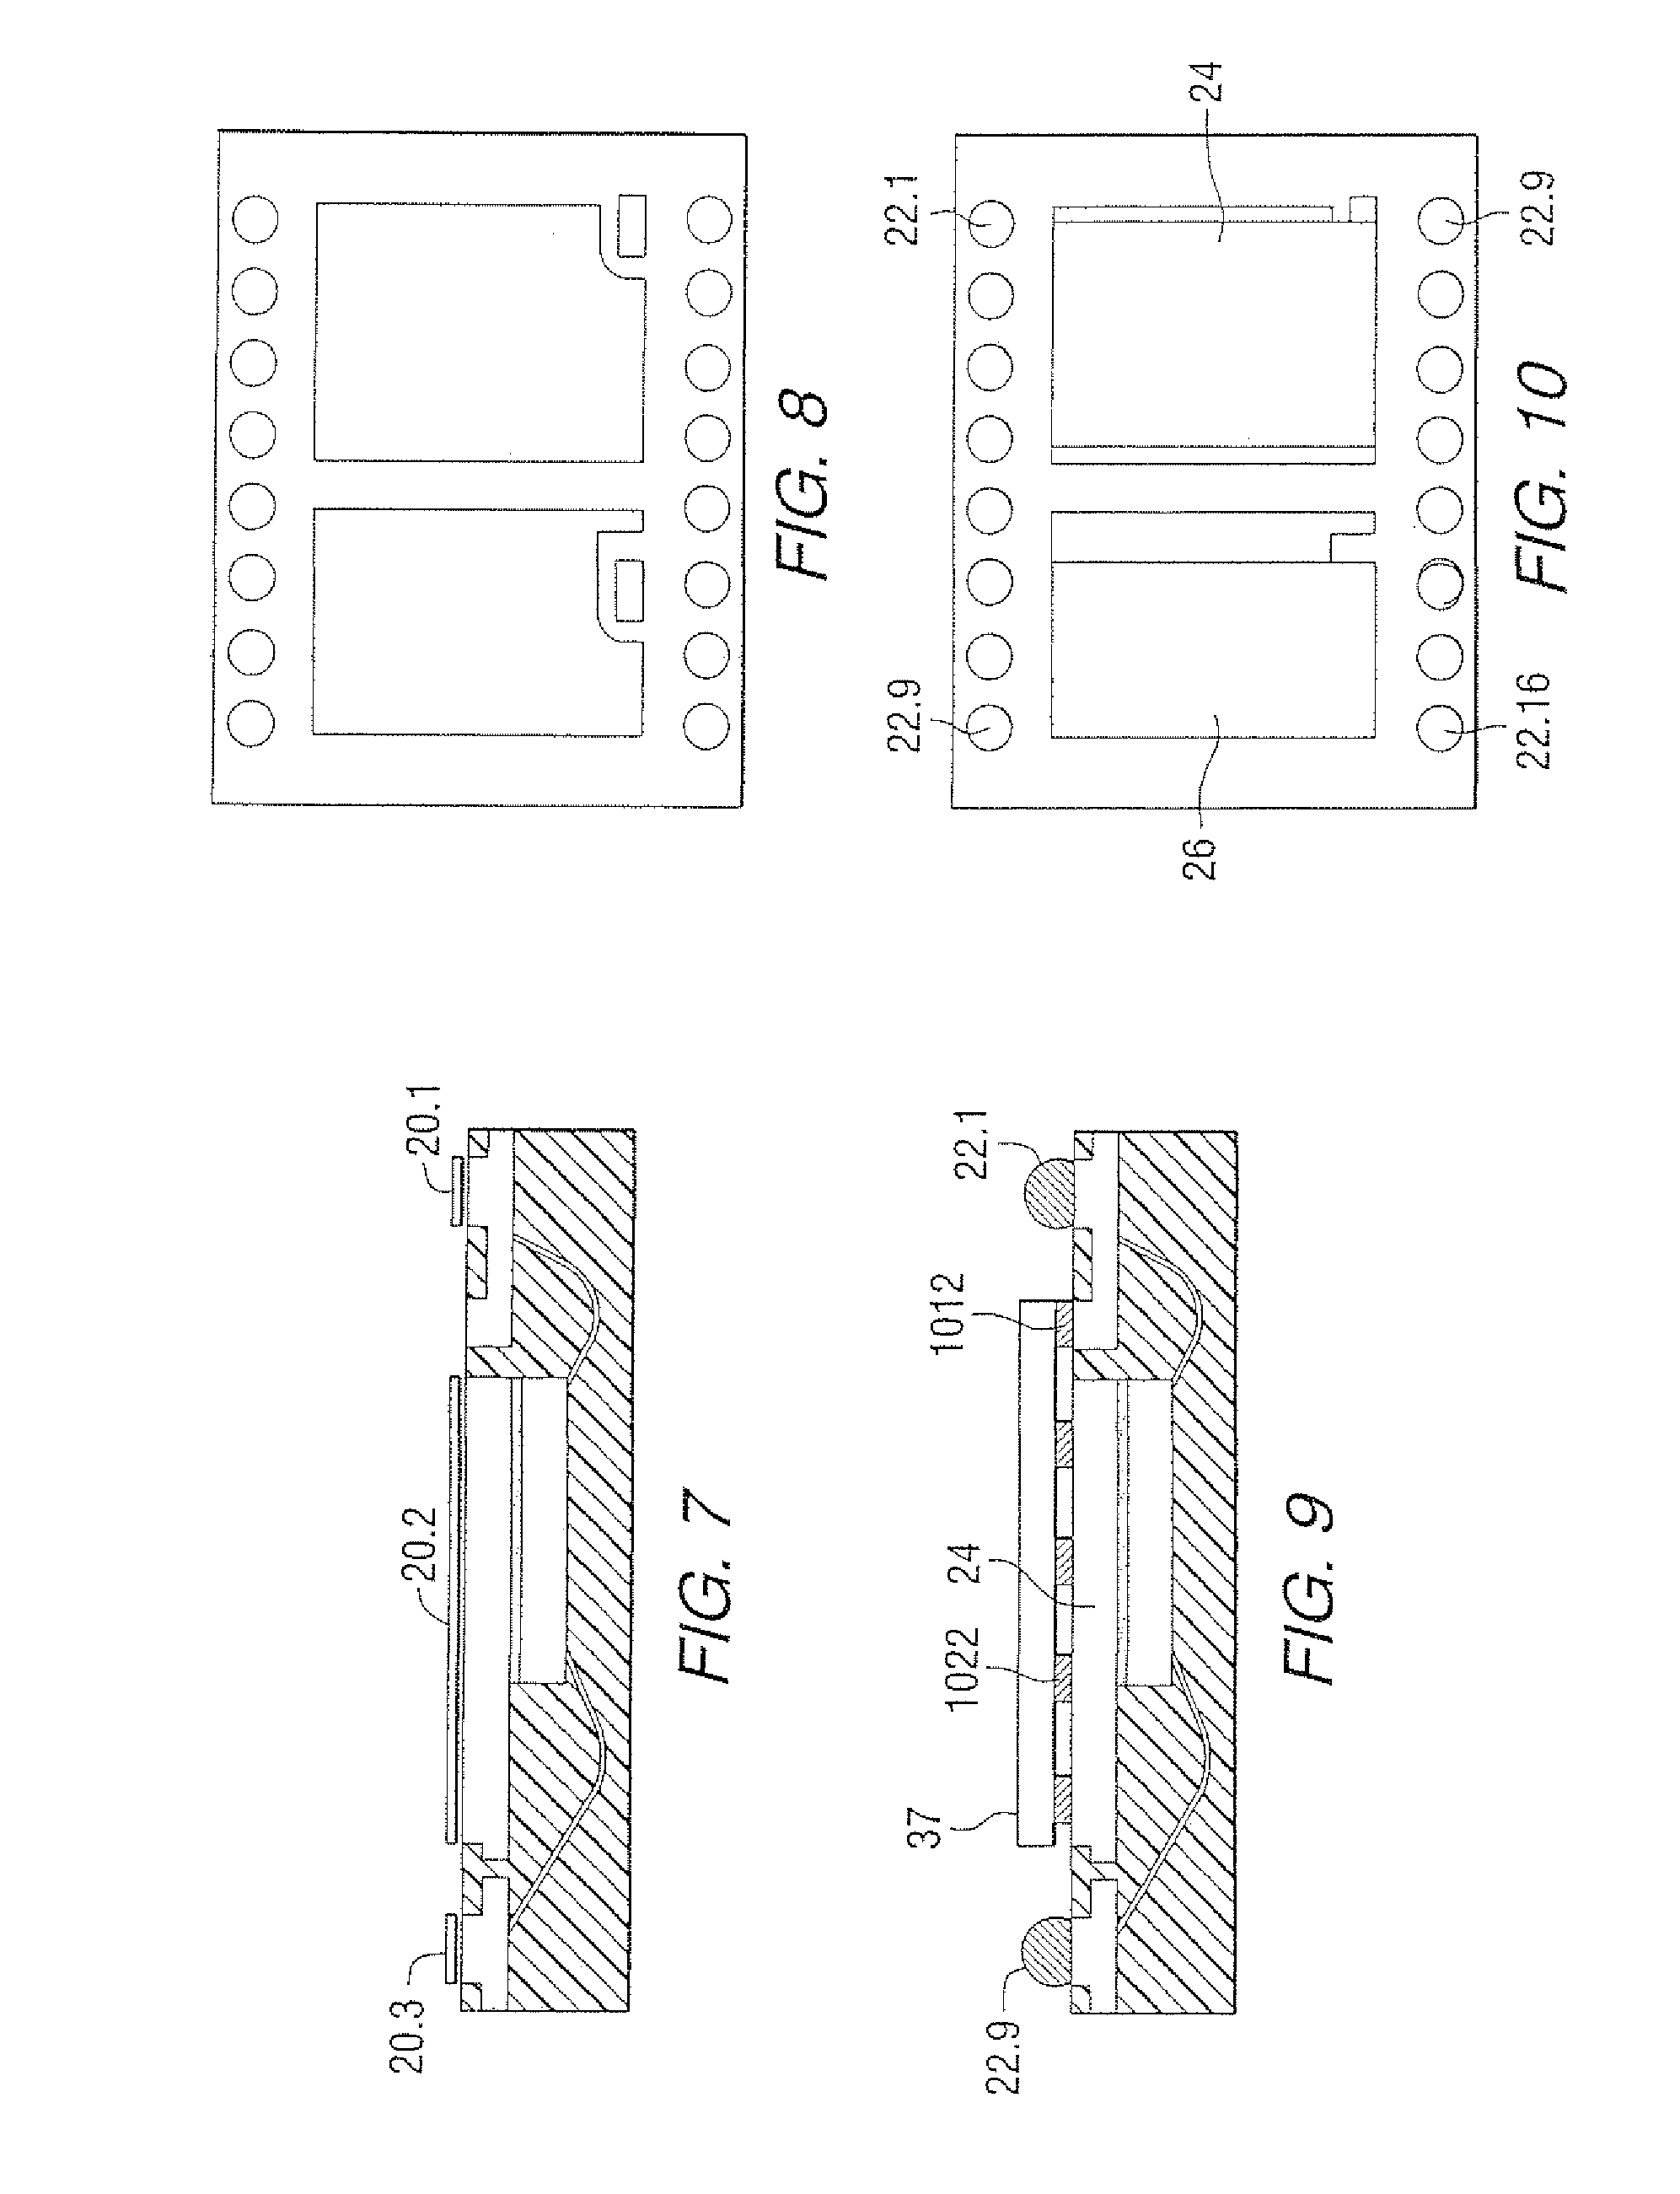 Method of assembly for multi-flip chip on lead frame on overmolded IC package